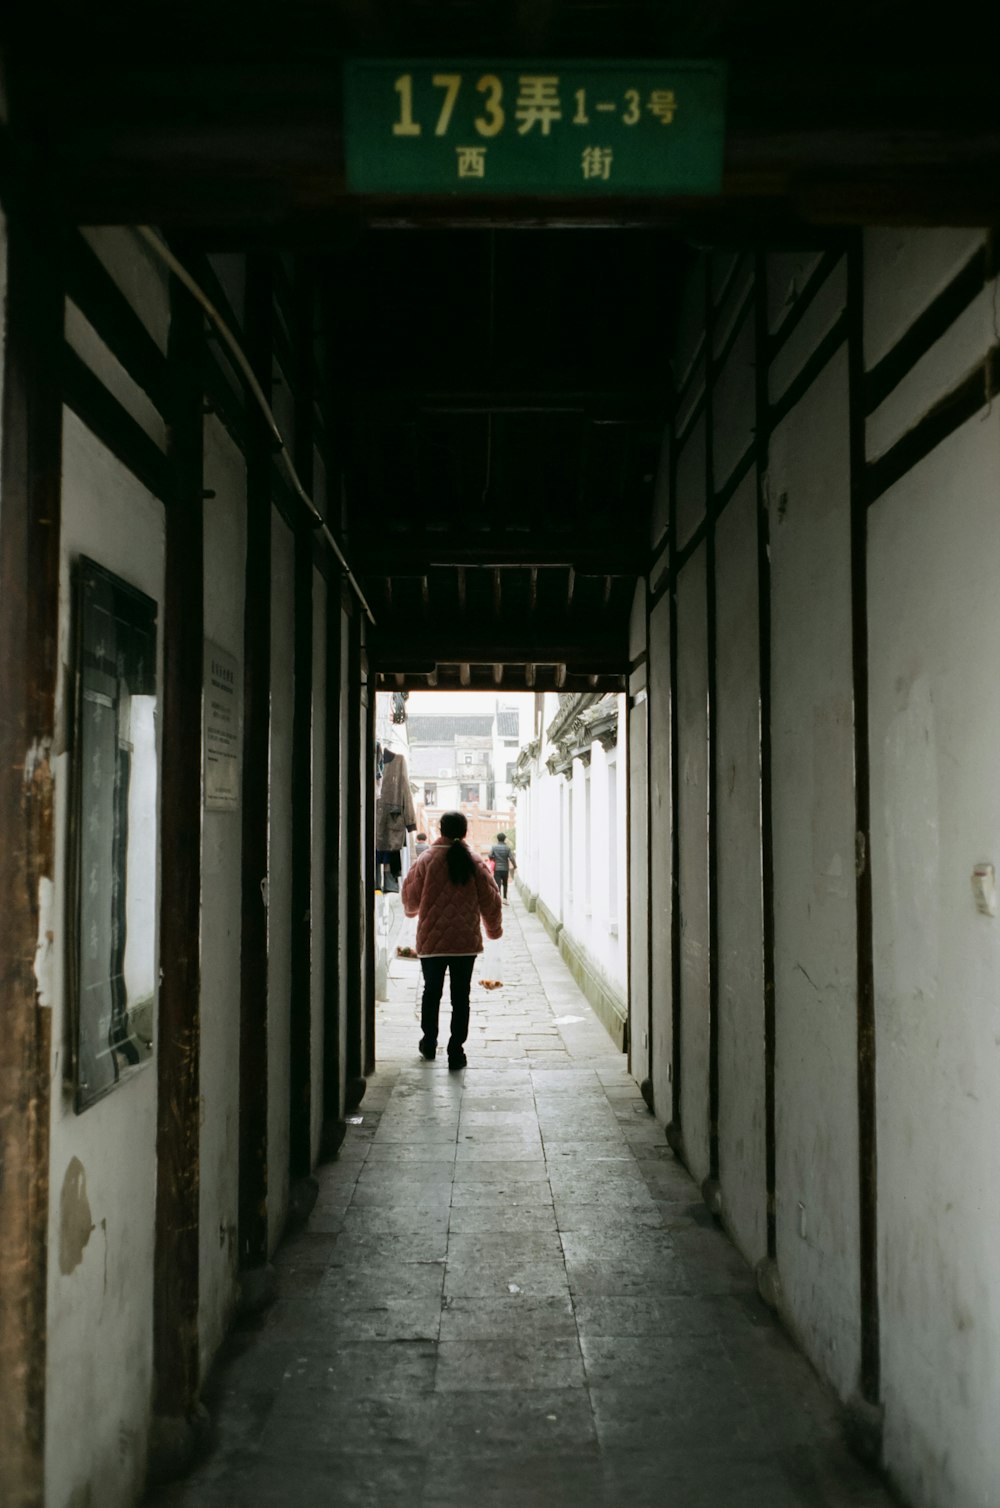 a person walking down a long hallway in a building